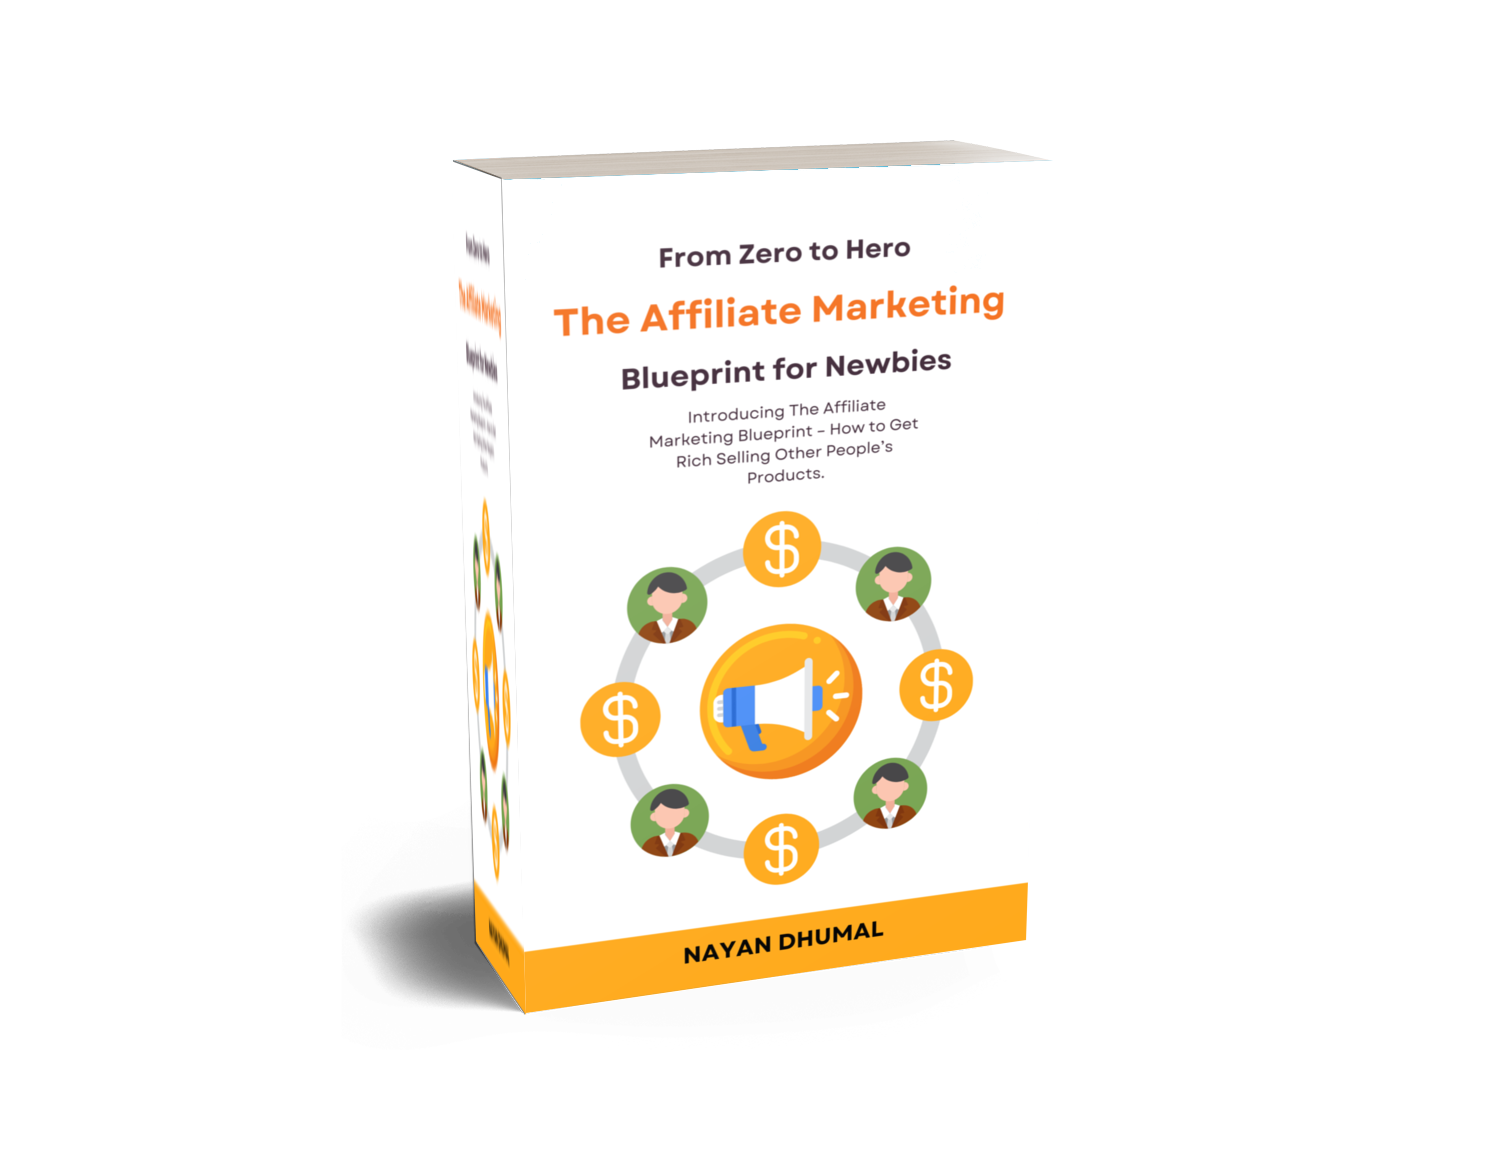 From Zero to Hero The Affiliate Marketing Blueprint for Newbies